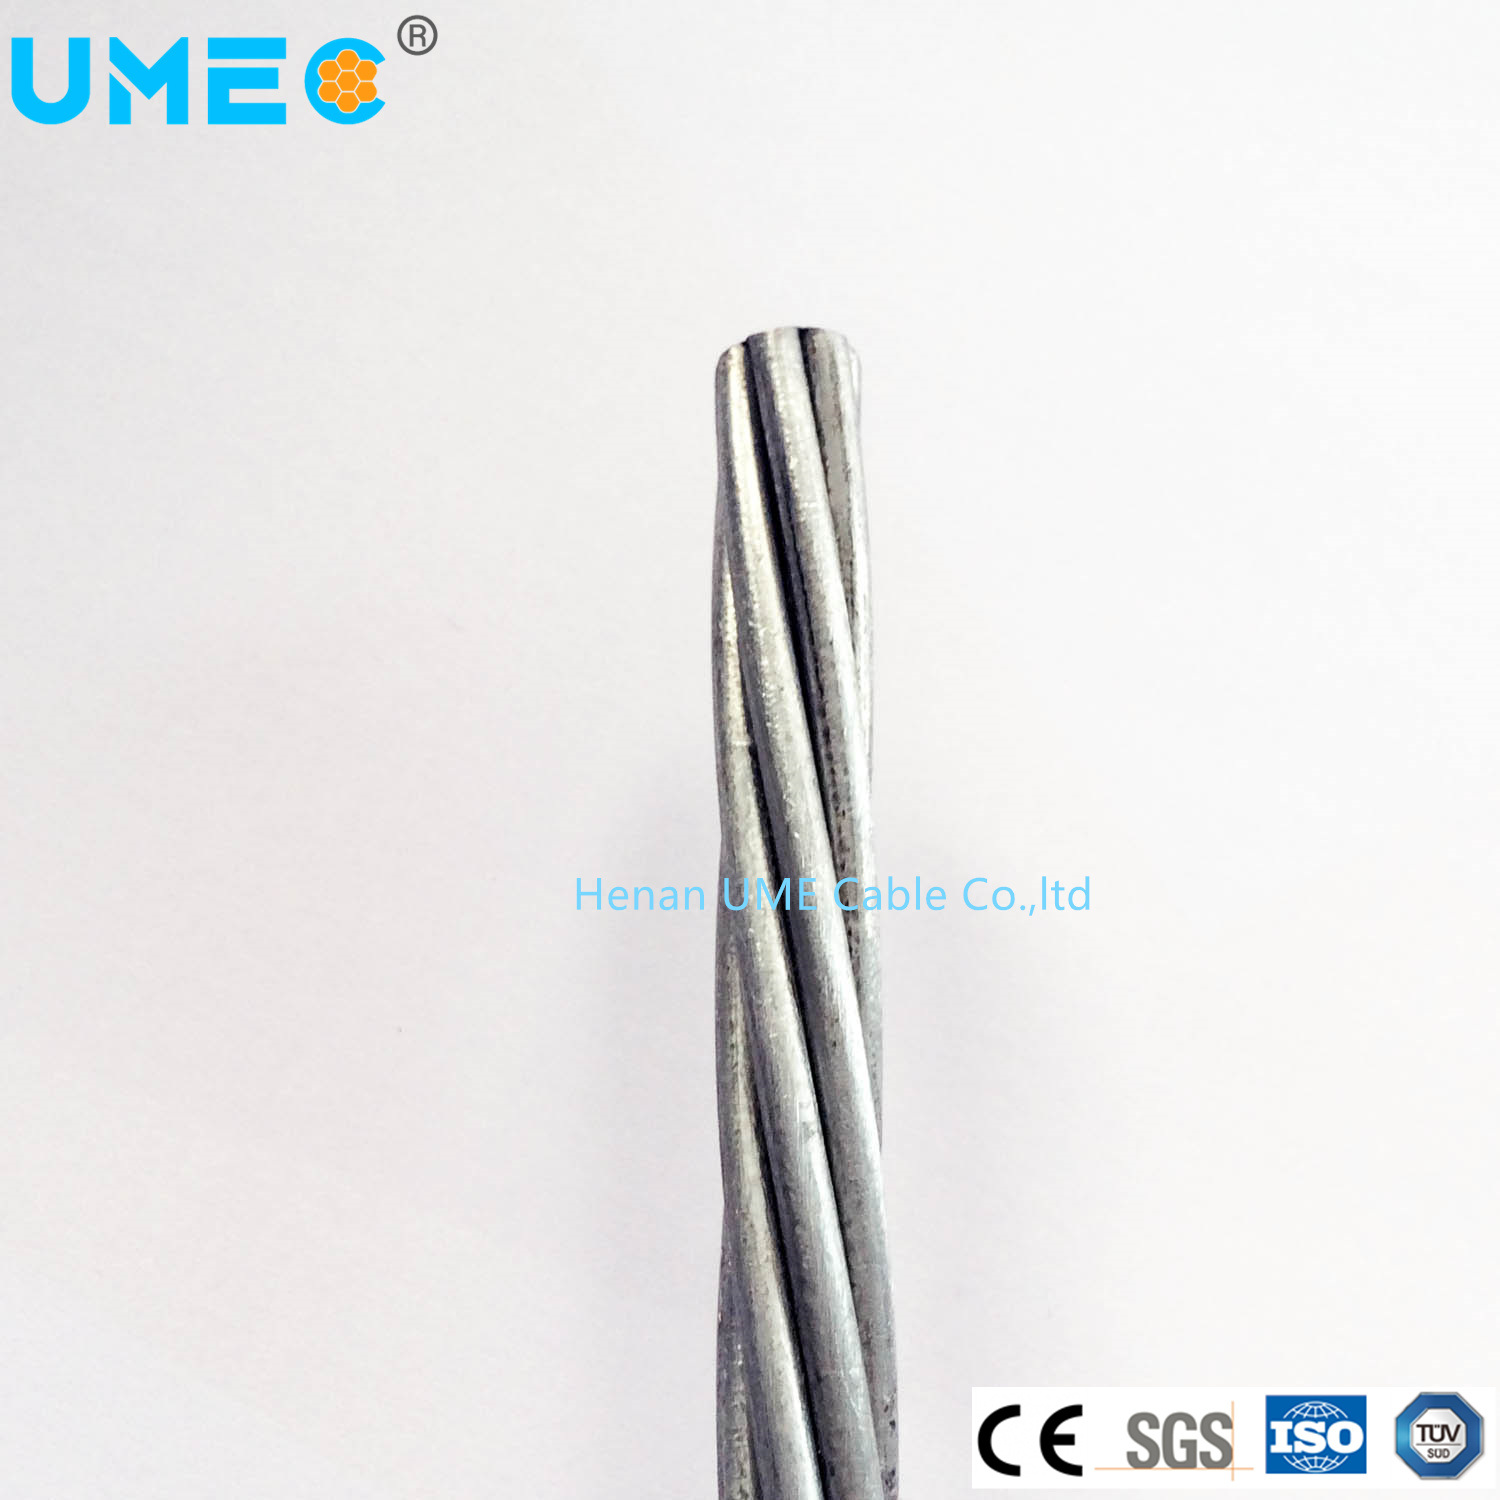 Electrical Sgw House Wire Galvanized Steel Cable Wire 7/3.0mm 7/4.0mm Galvanized Steel Stranded Wire Electrical Cable